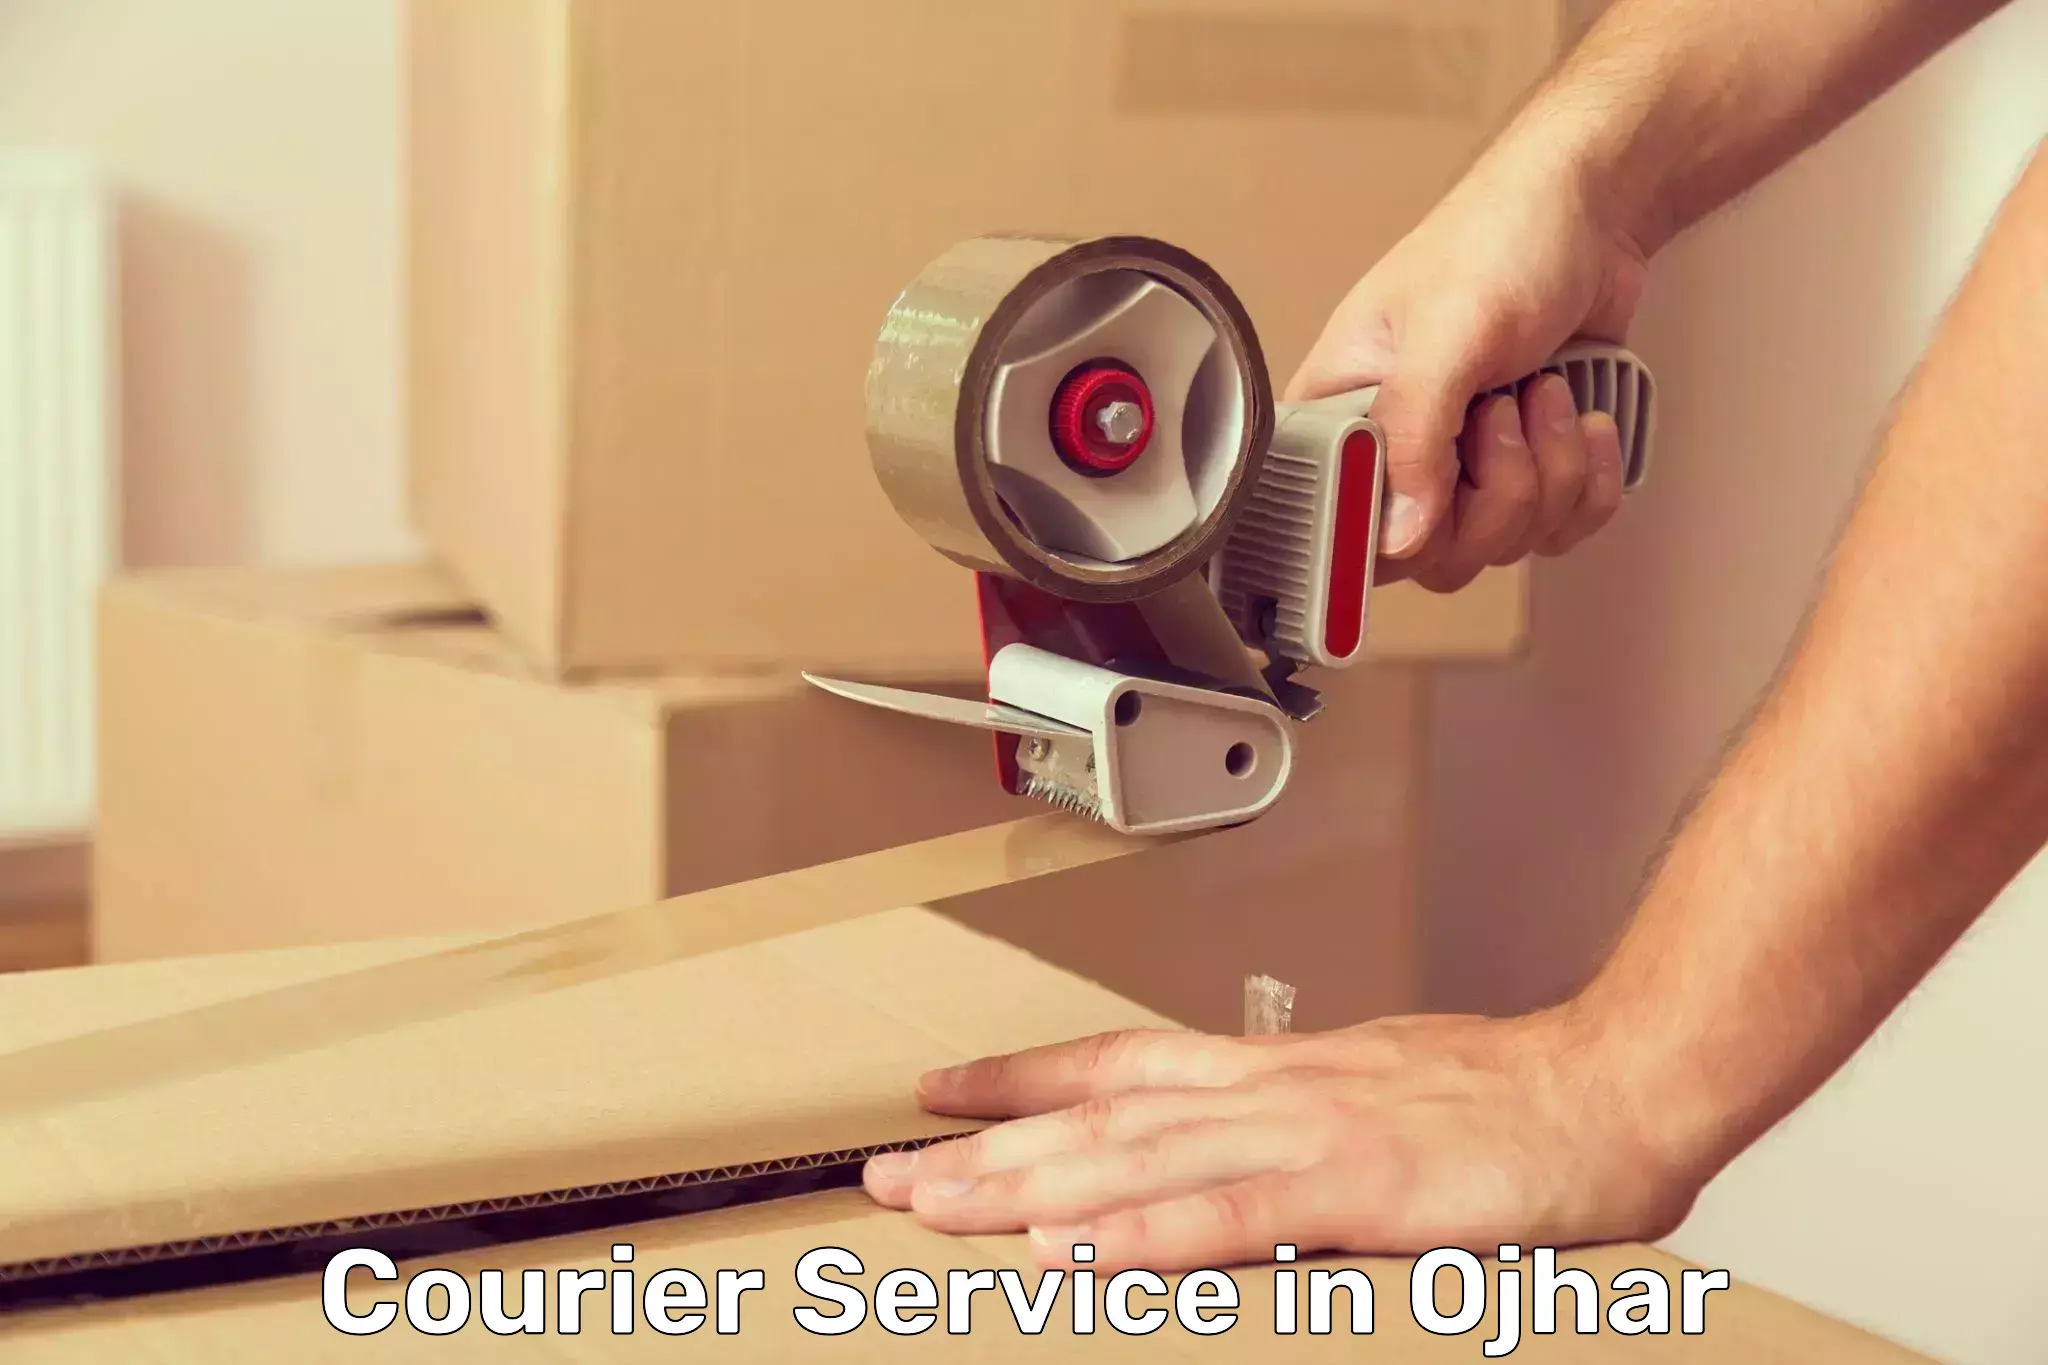 Parcel handling and care in Ojhar